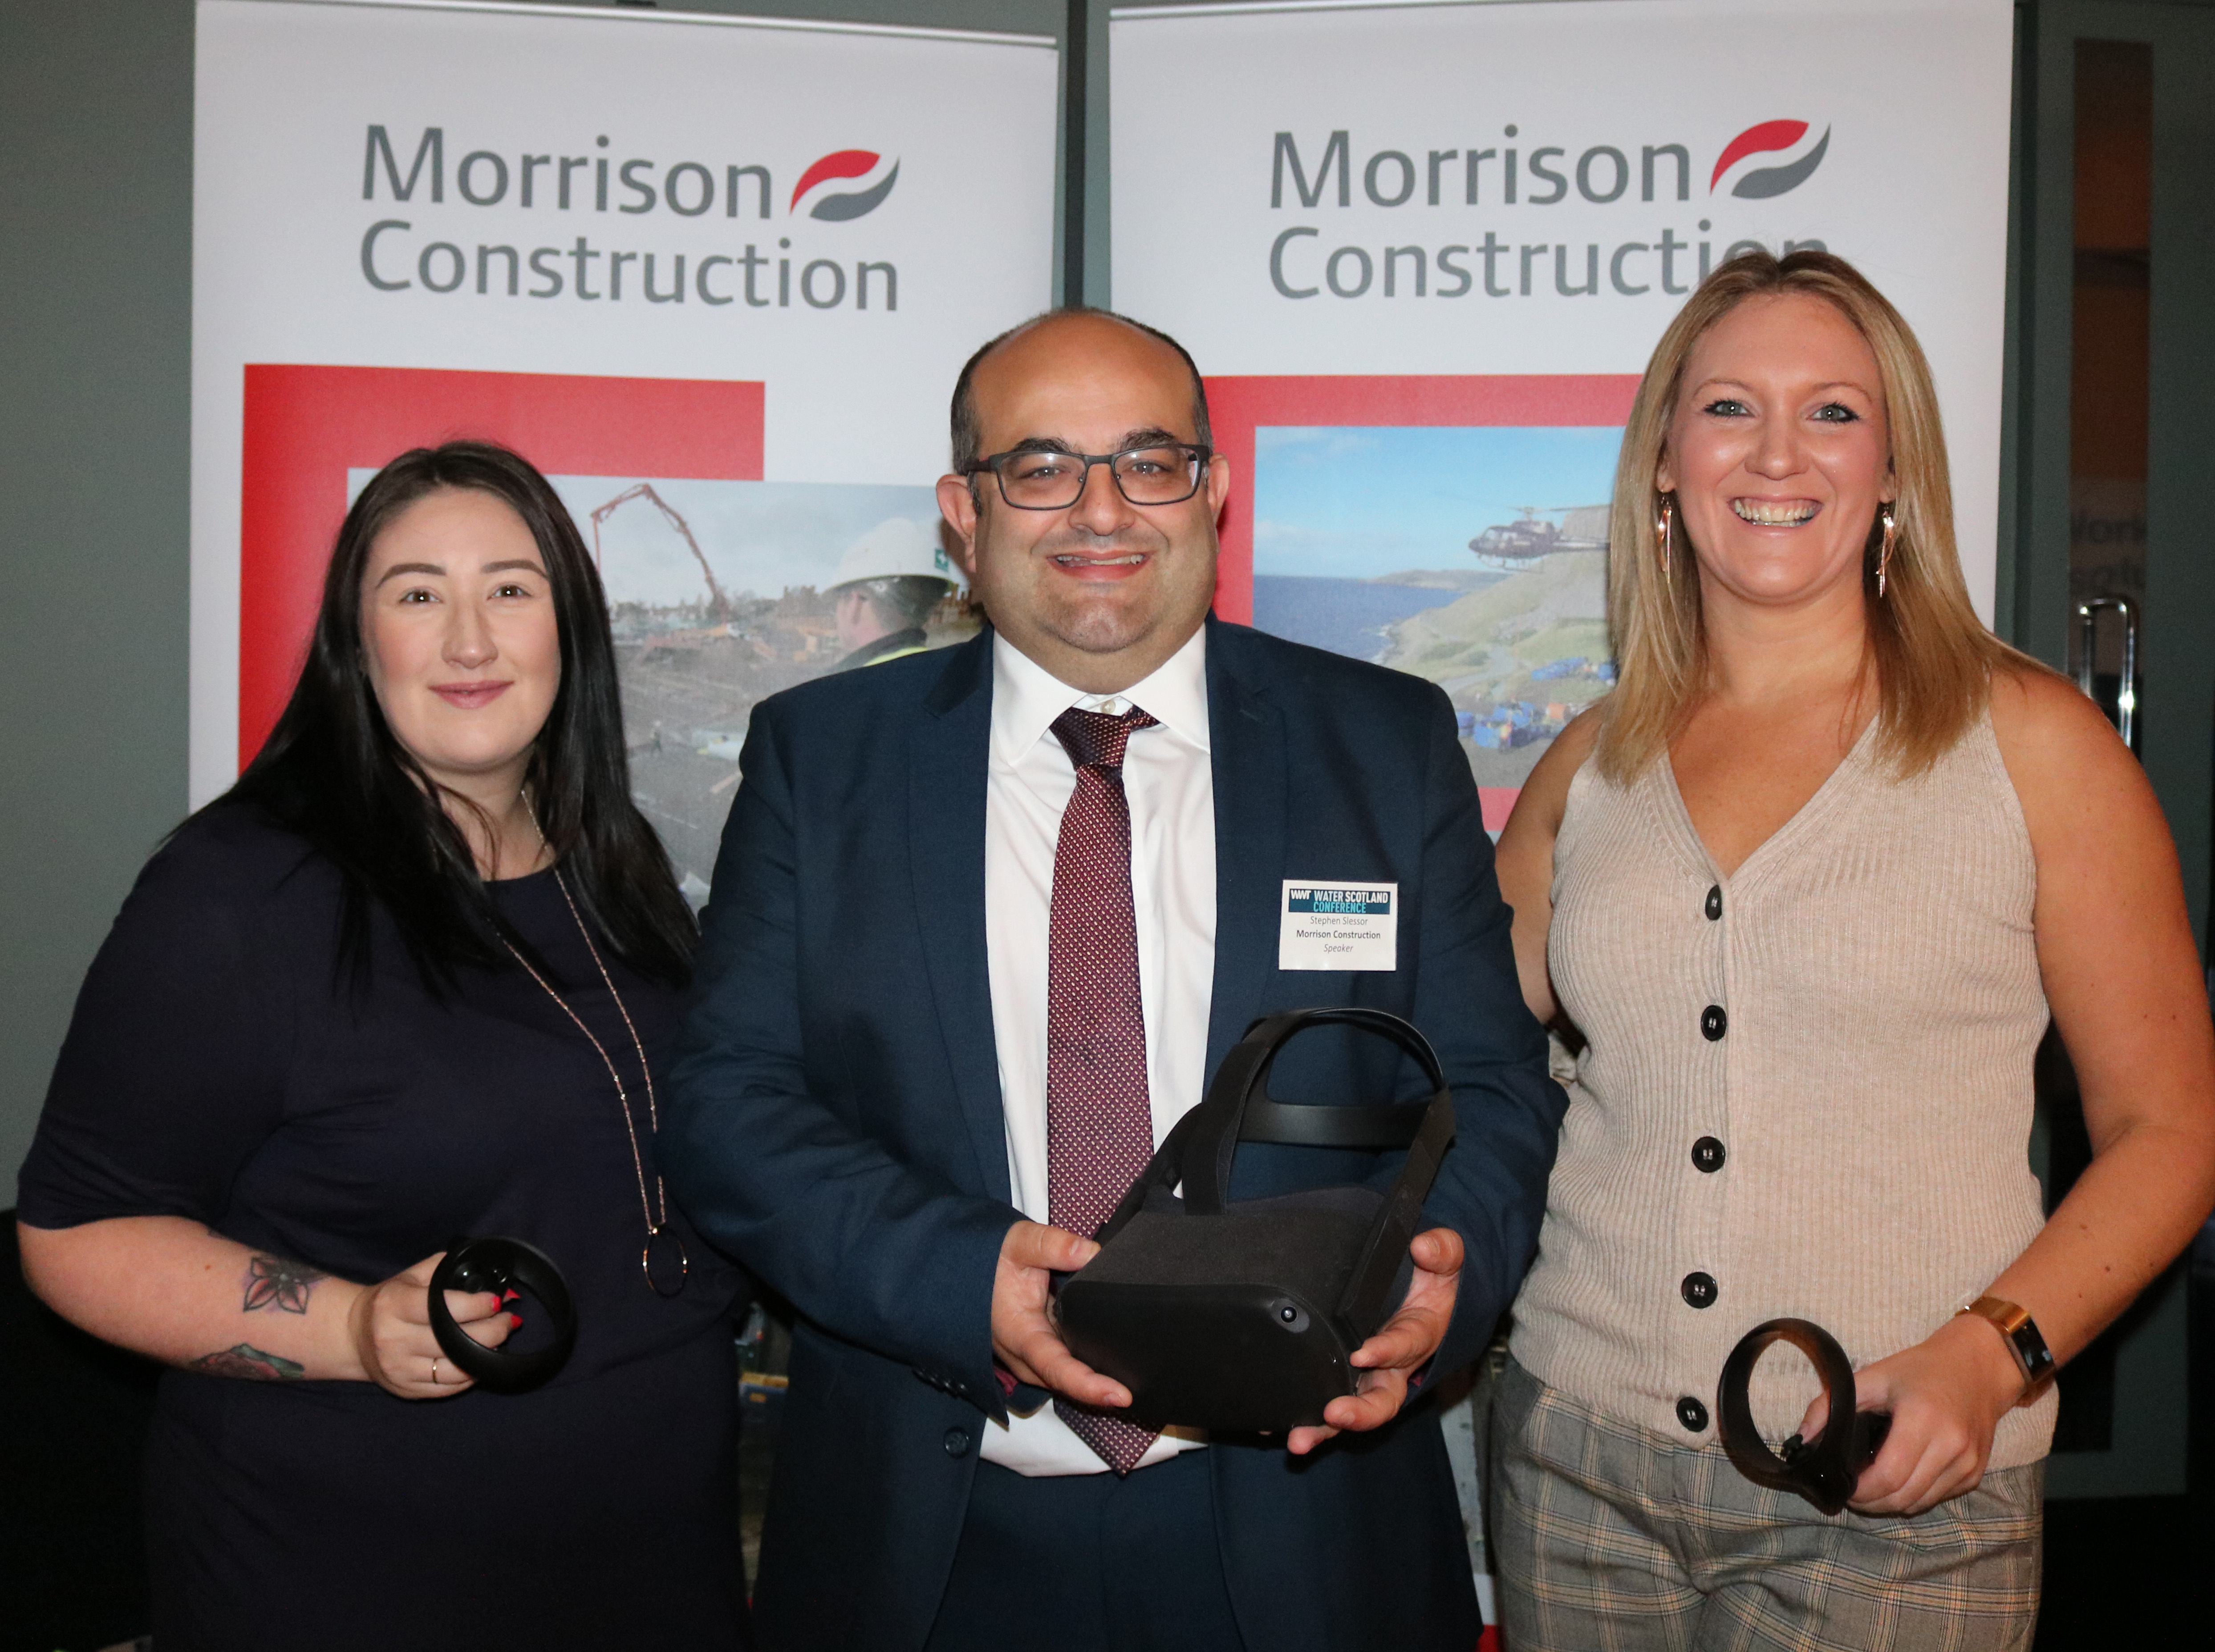 Importance of water hygiene highlighted with new Morrison Construction VR tool